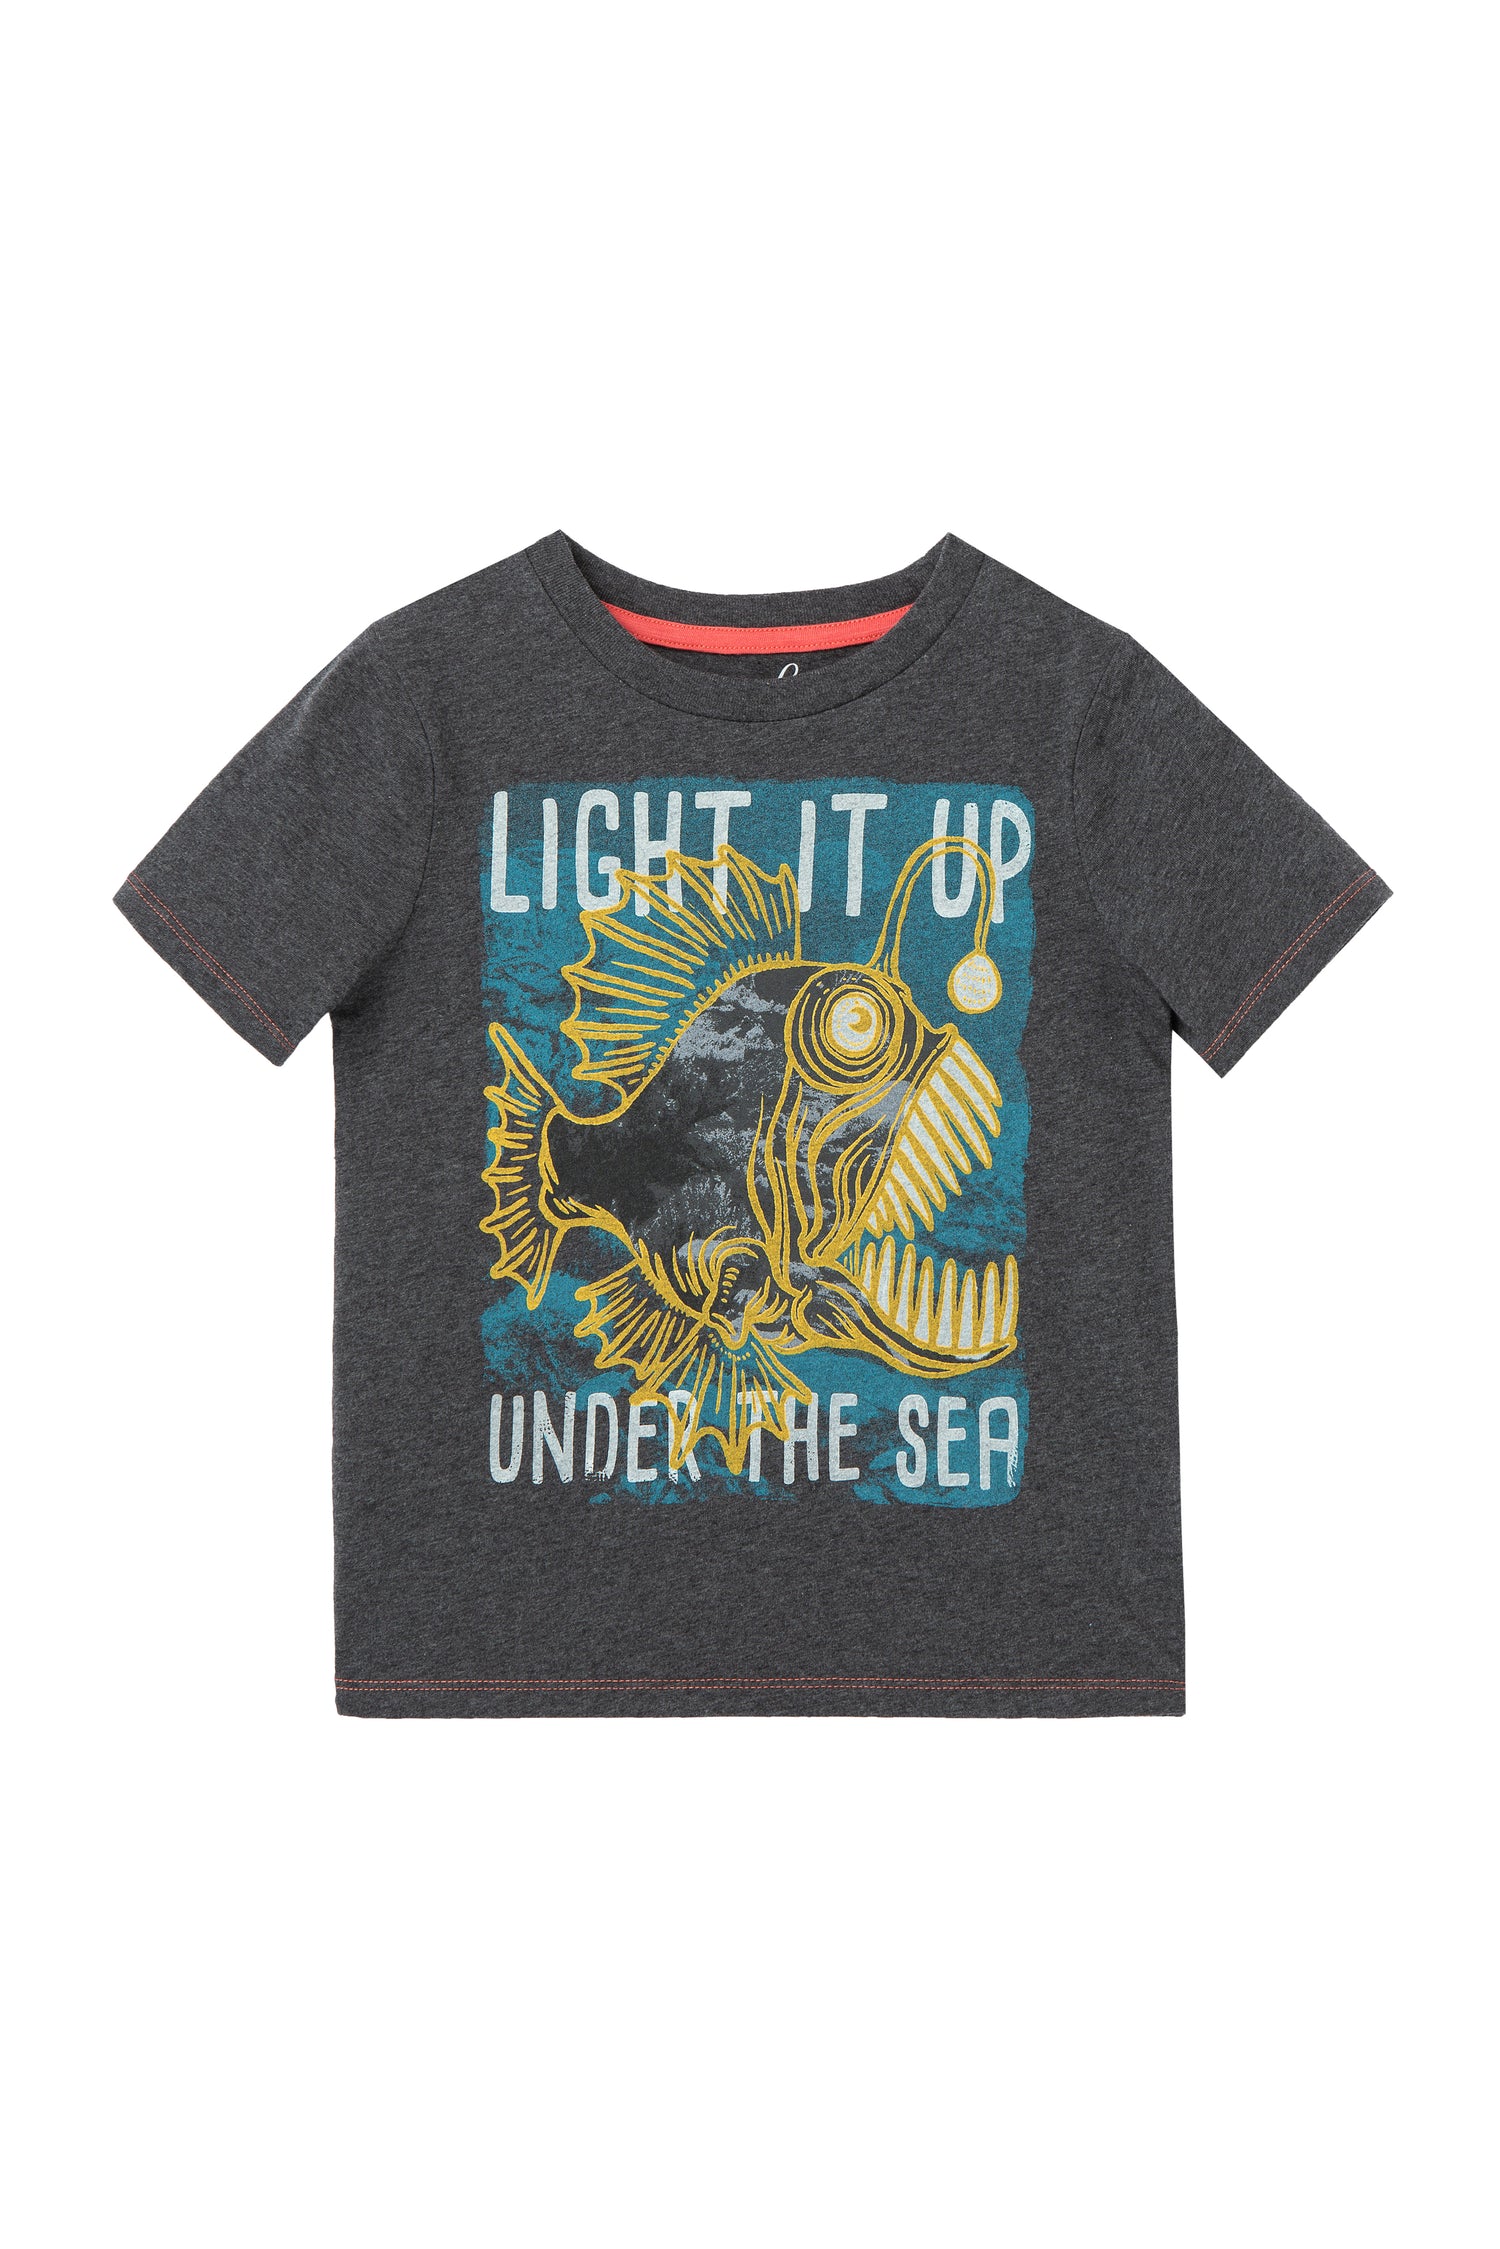 DARK GREY T-SHIRT WITH FISH GRAPHIC AND THE WORDS "LIGHT IT UP UNDER THE SEA"